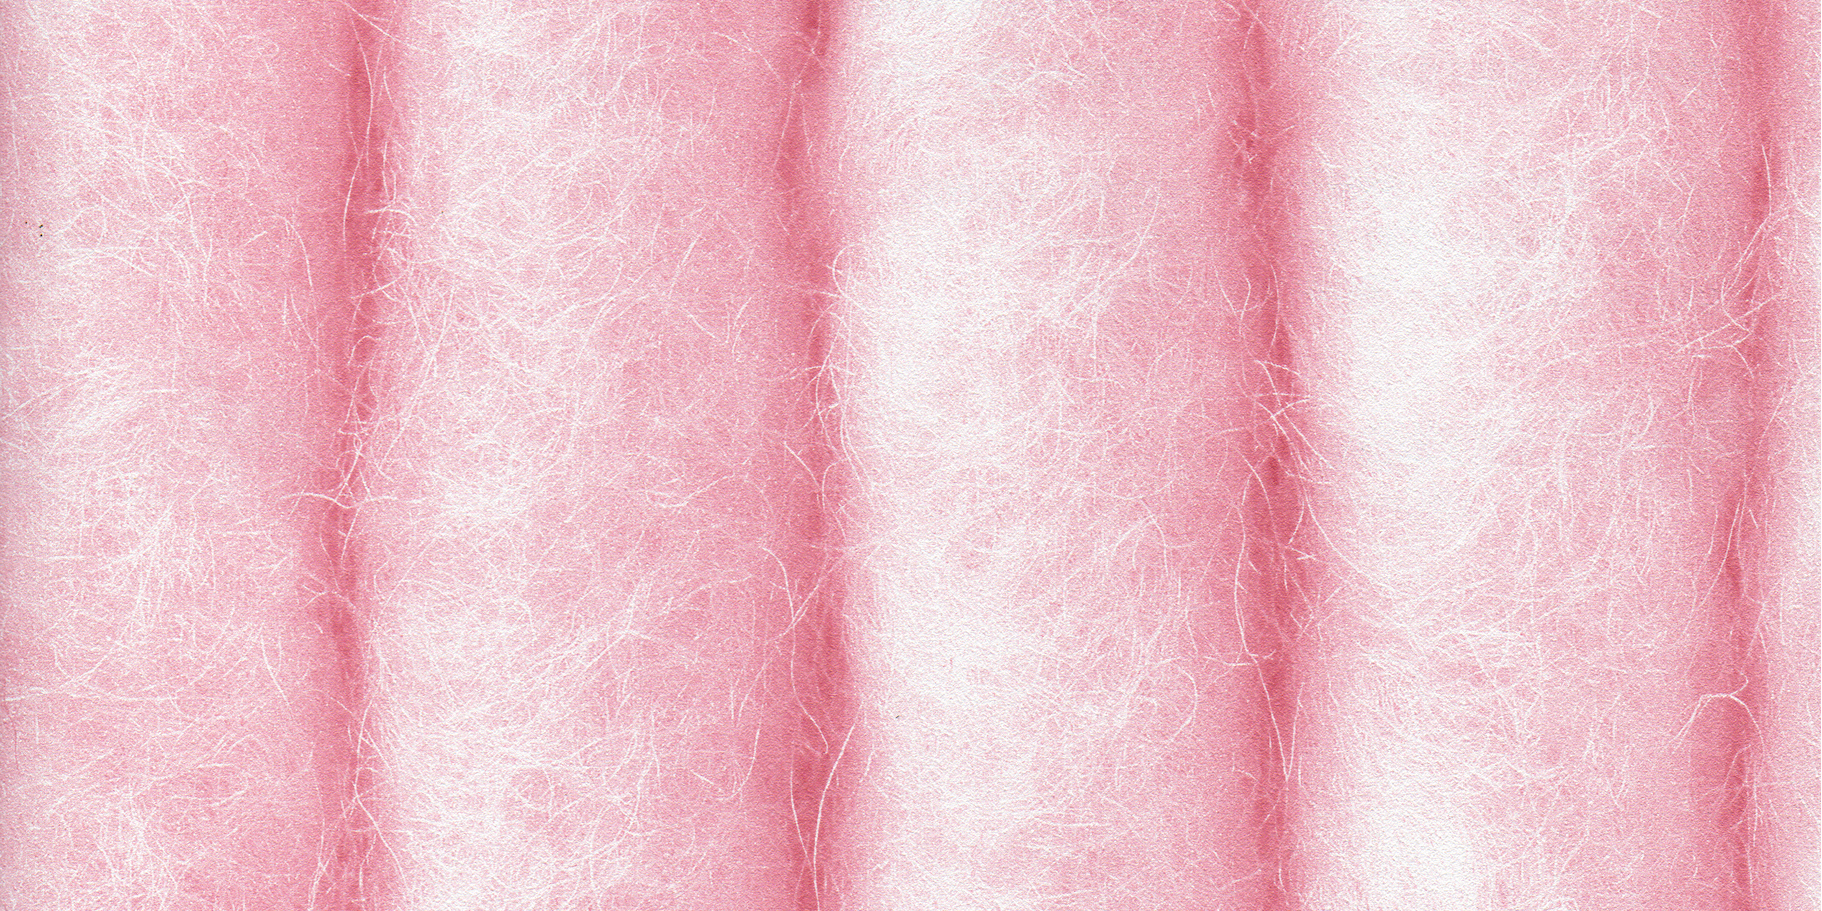 Morning at the Museum. Image of pink fuzzy texture. Scroll down for program information below.